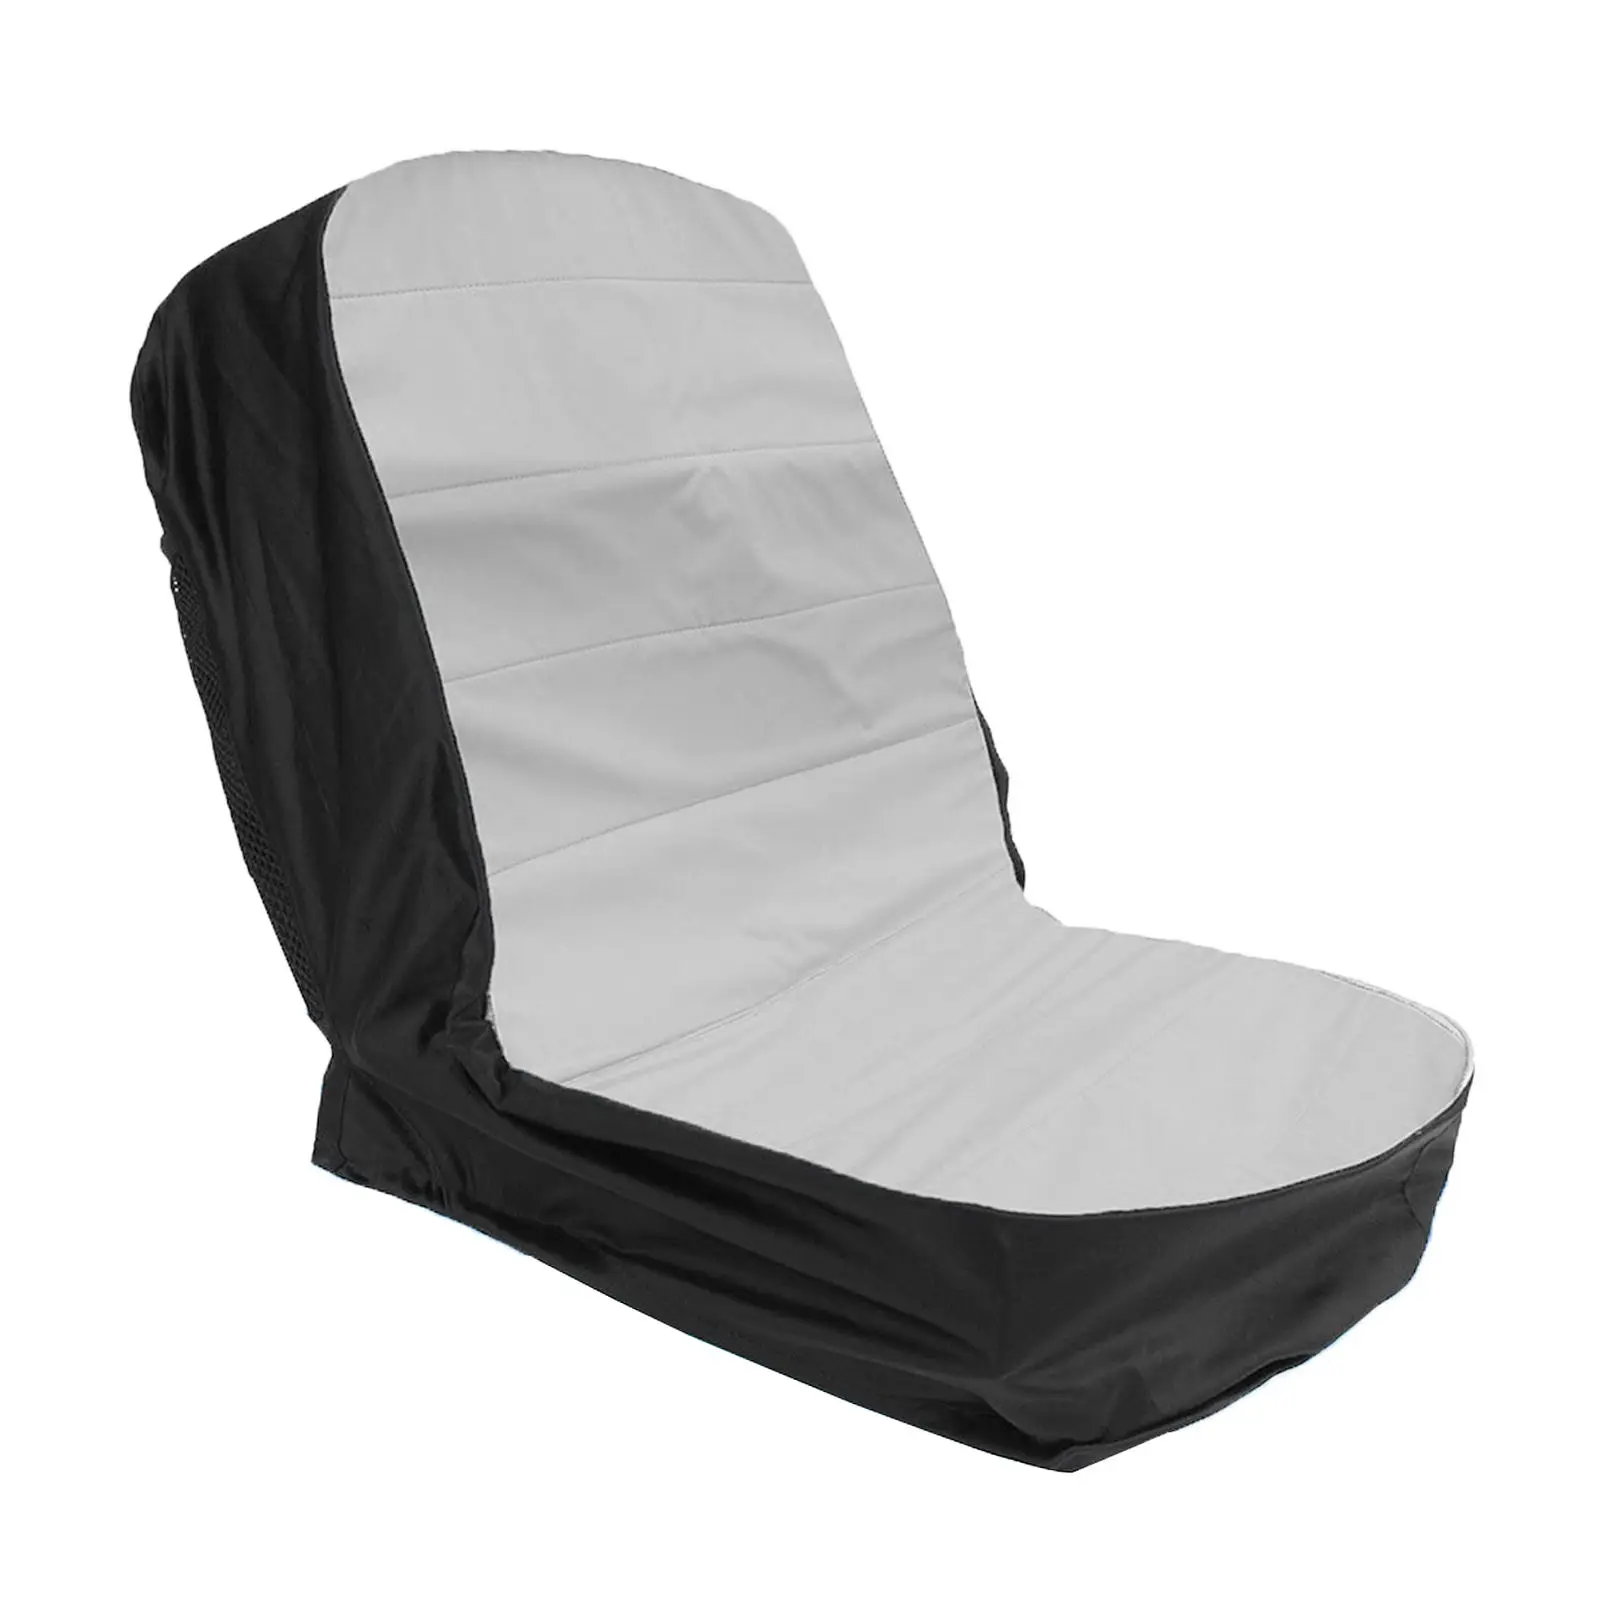 NEW Universal Riding Lawn Mower Tractor Seat Cover Padded Comfort Pad with Storage Pouch Convenient Bag